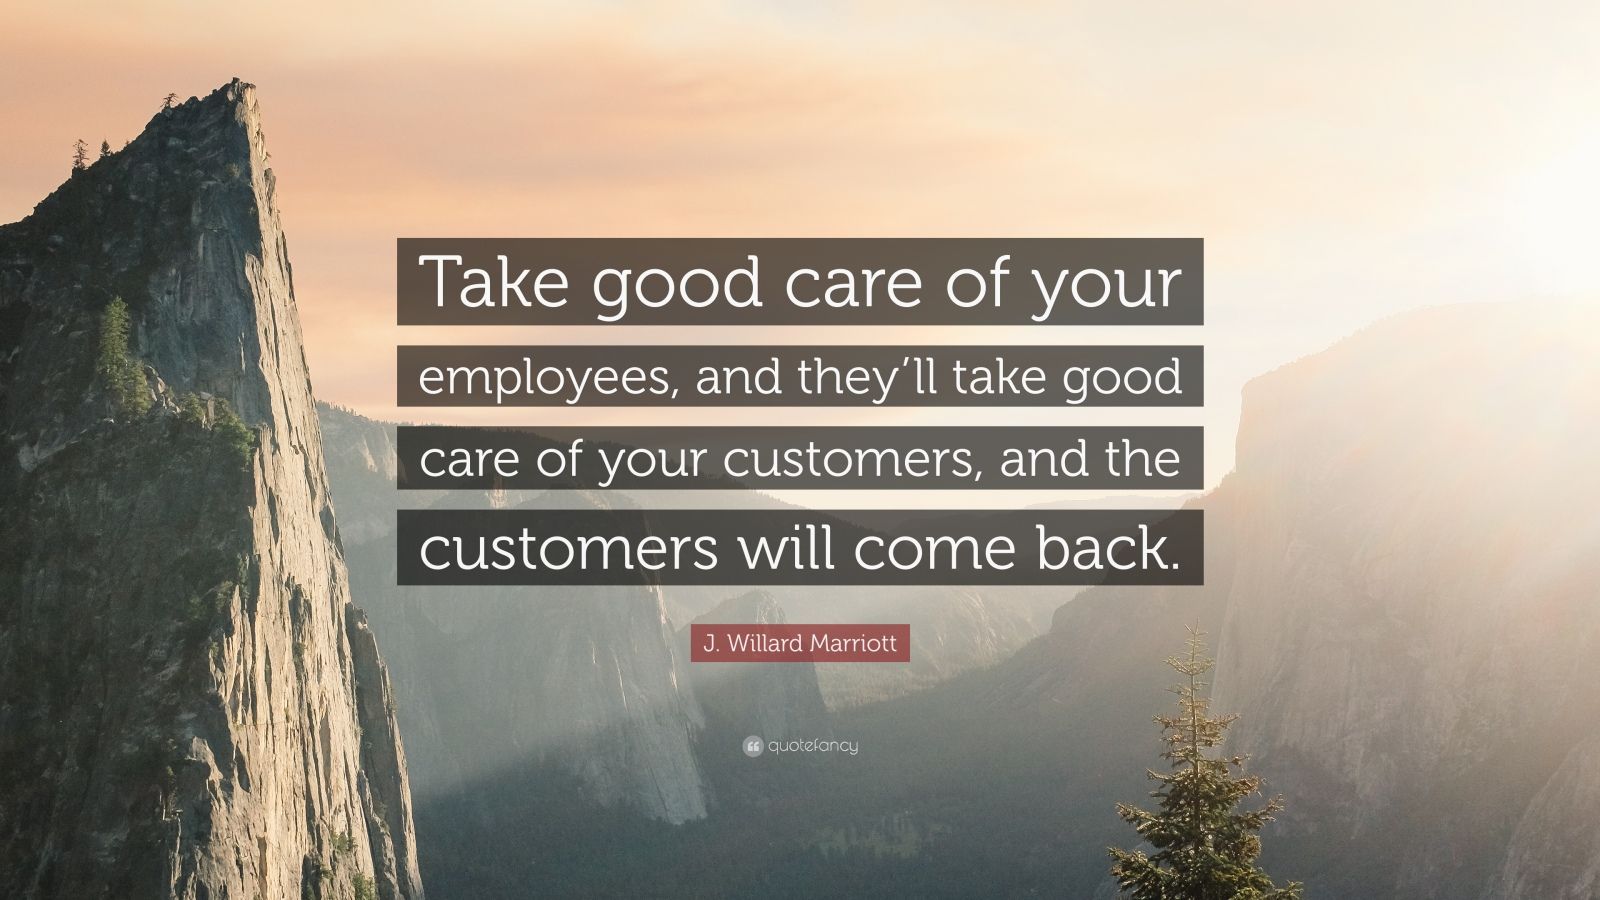 J. Willard Marriott Quote: “Take good care of your employees, and they